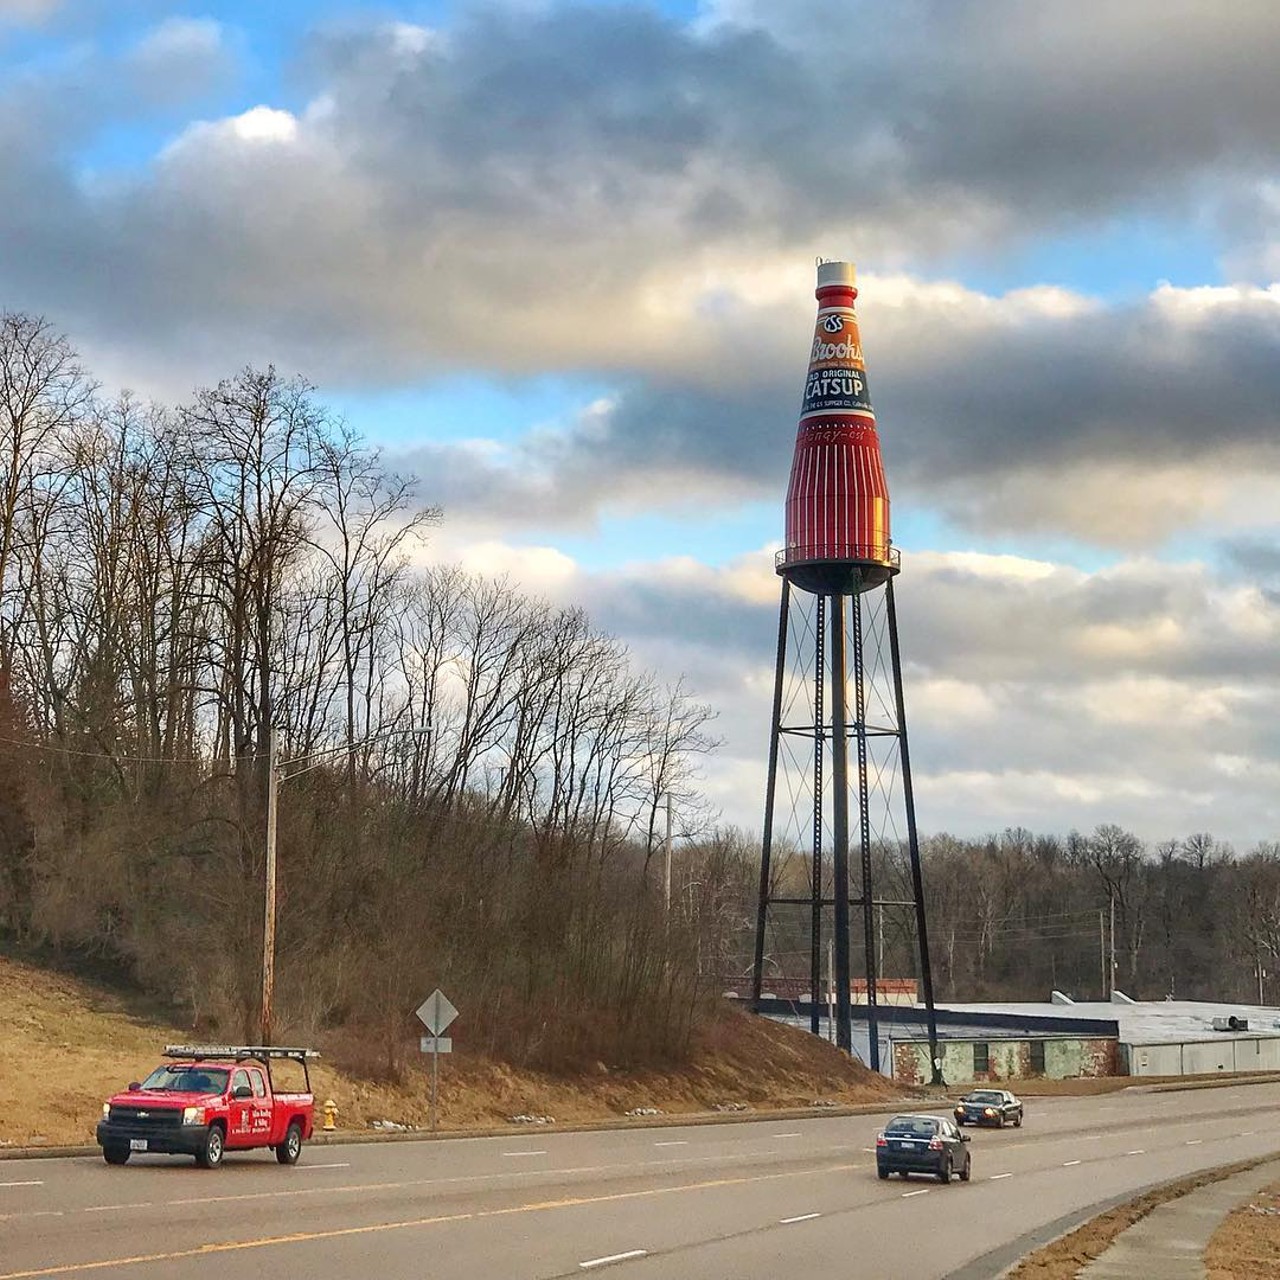 World's Largest Catsup Bottle
800 S. Morrison Ave., Collinsville, IL
The World's Largest Catsup Bottle has had many owners, and it has survived through the decades because of their dedication. Check it out just off of I-55 in Collinsville, Illinois.
Photo courtesy of kore_mary / Instagram